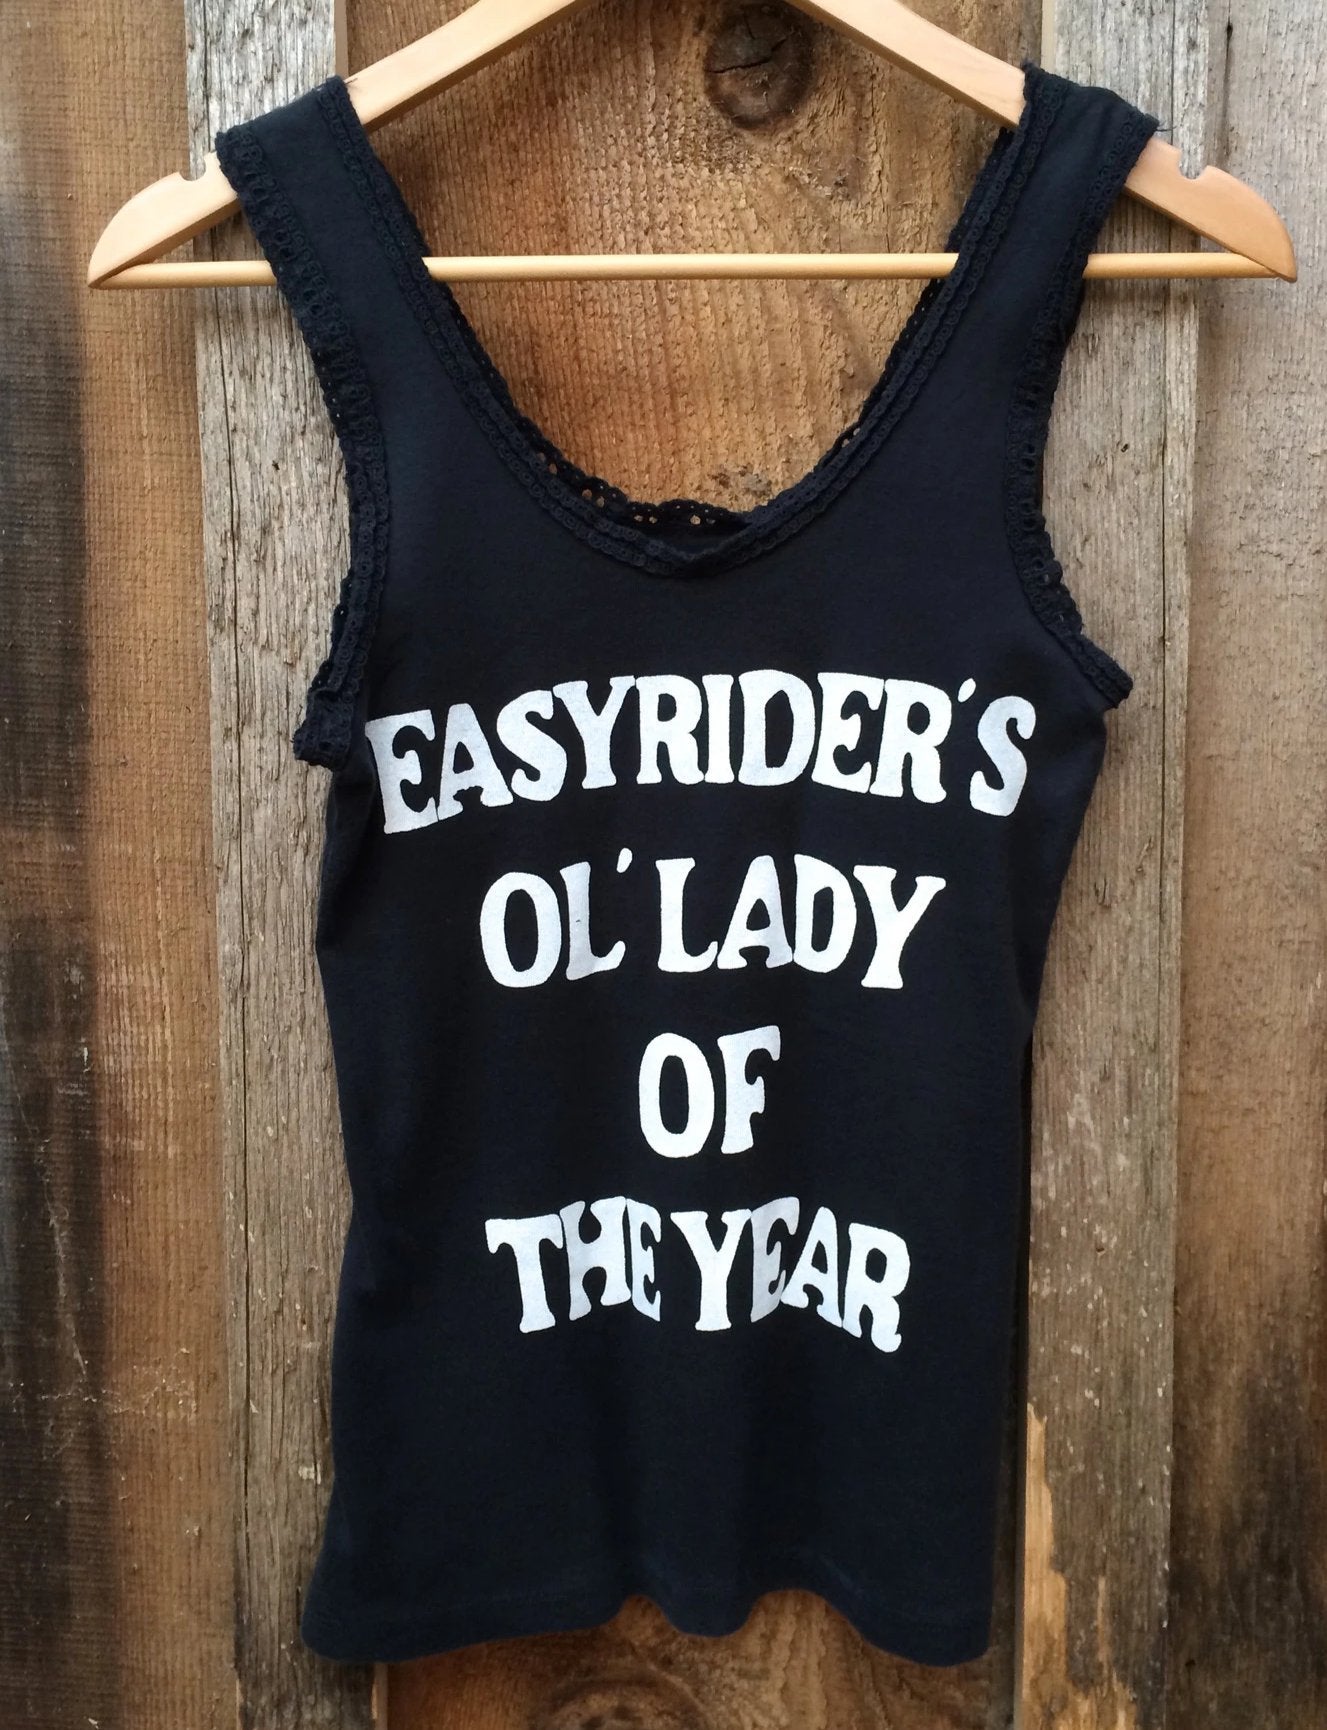 Easy Rider's Ol' Lady Of the Year Vintage Lace Tank Black/White